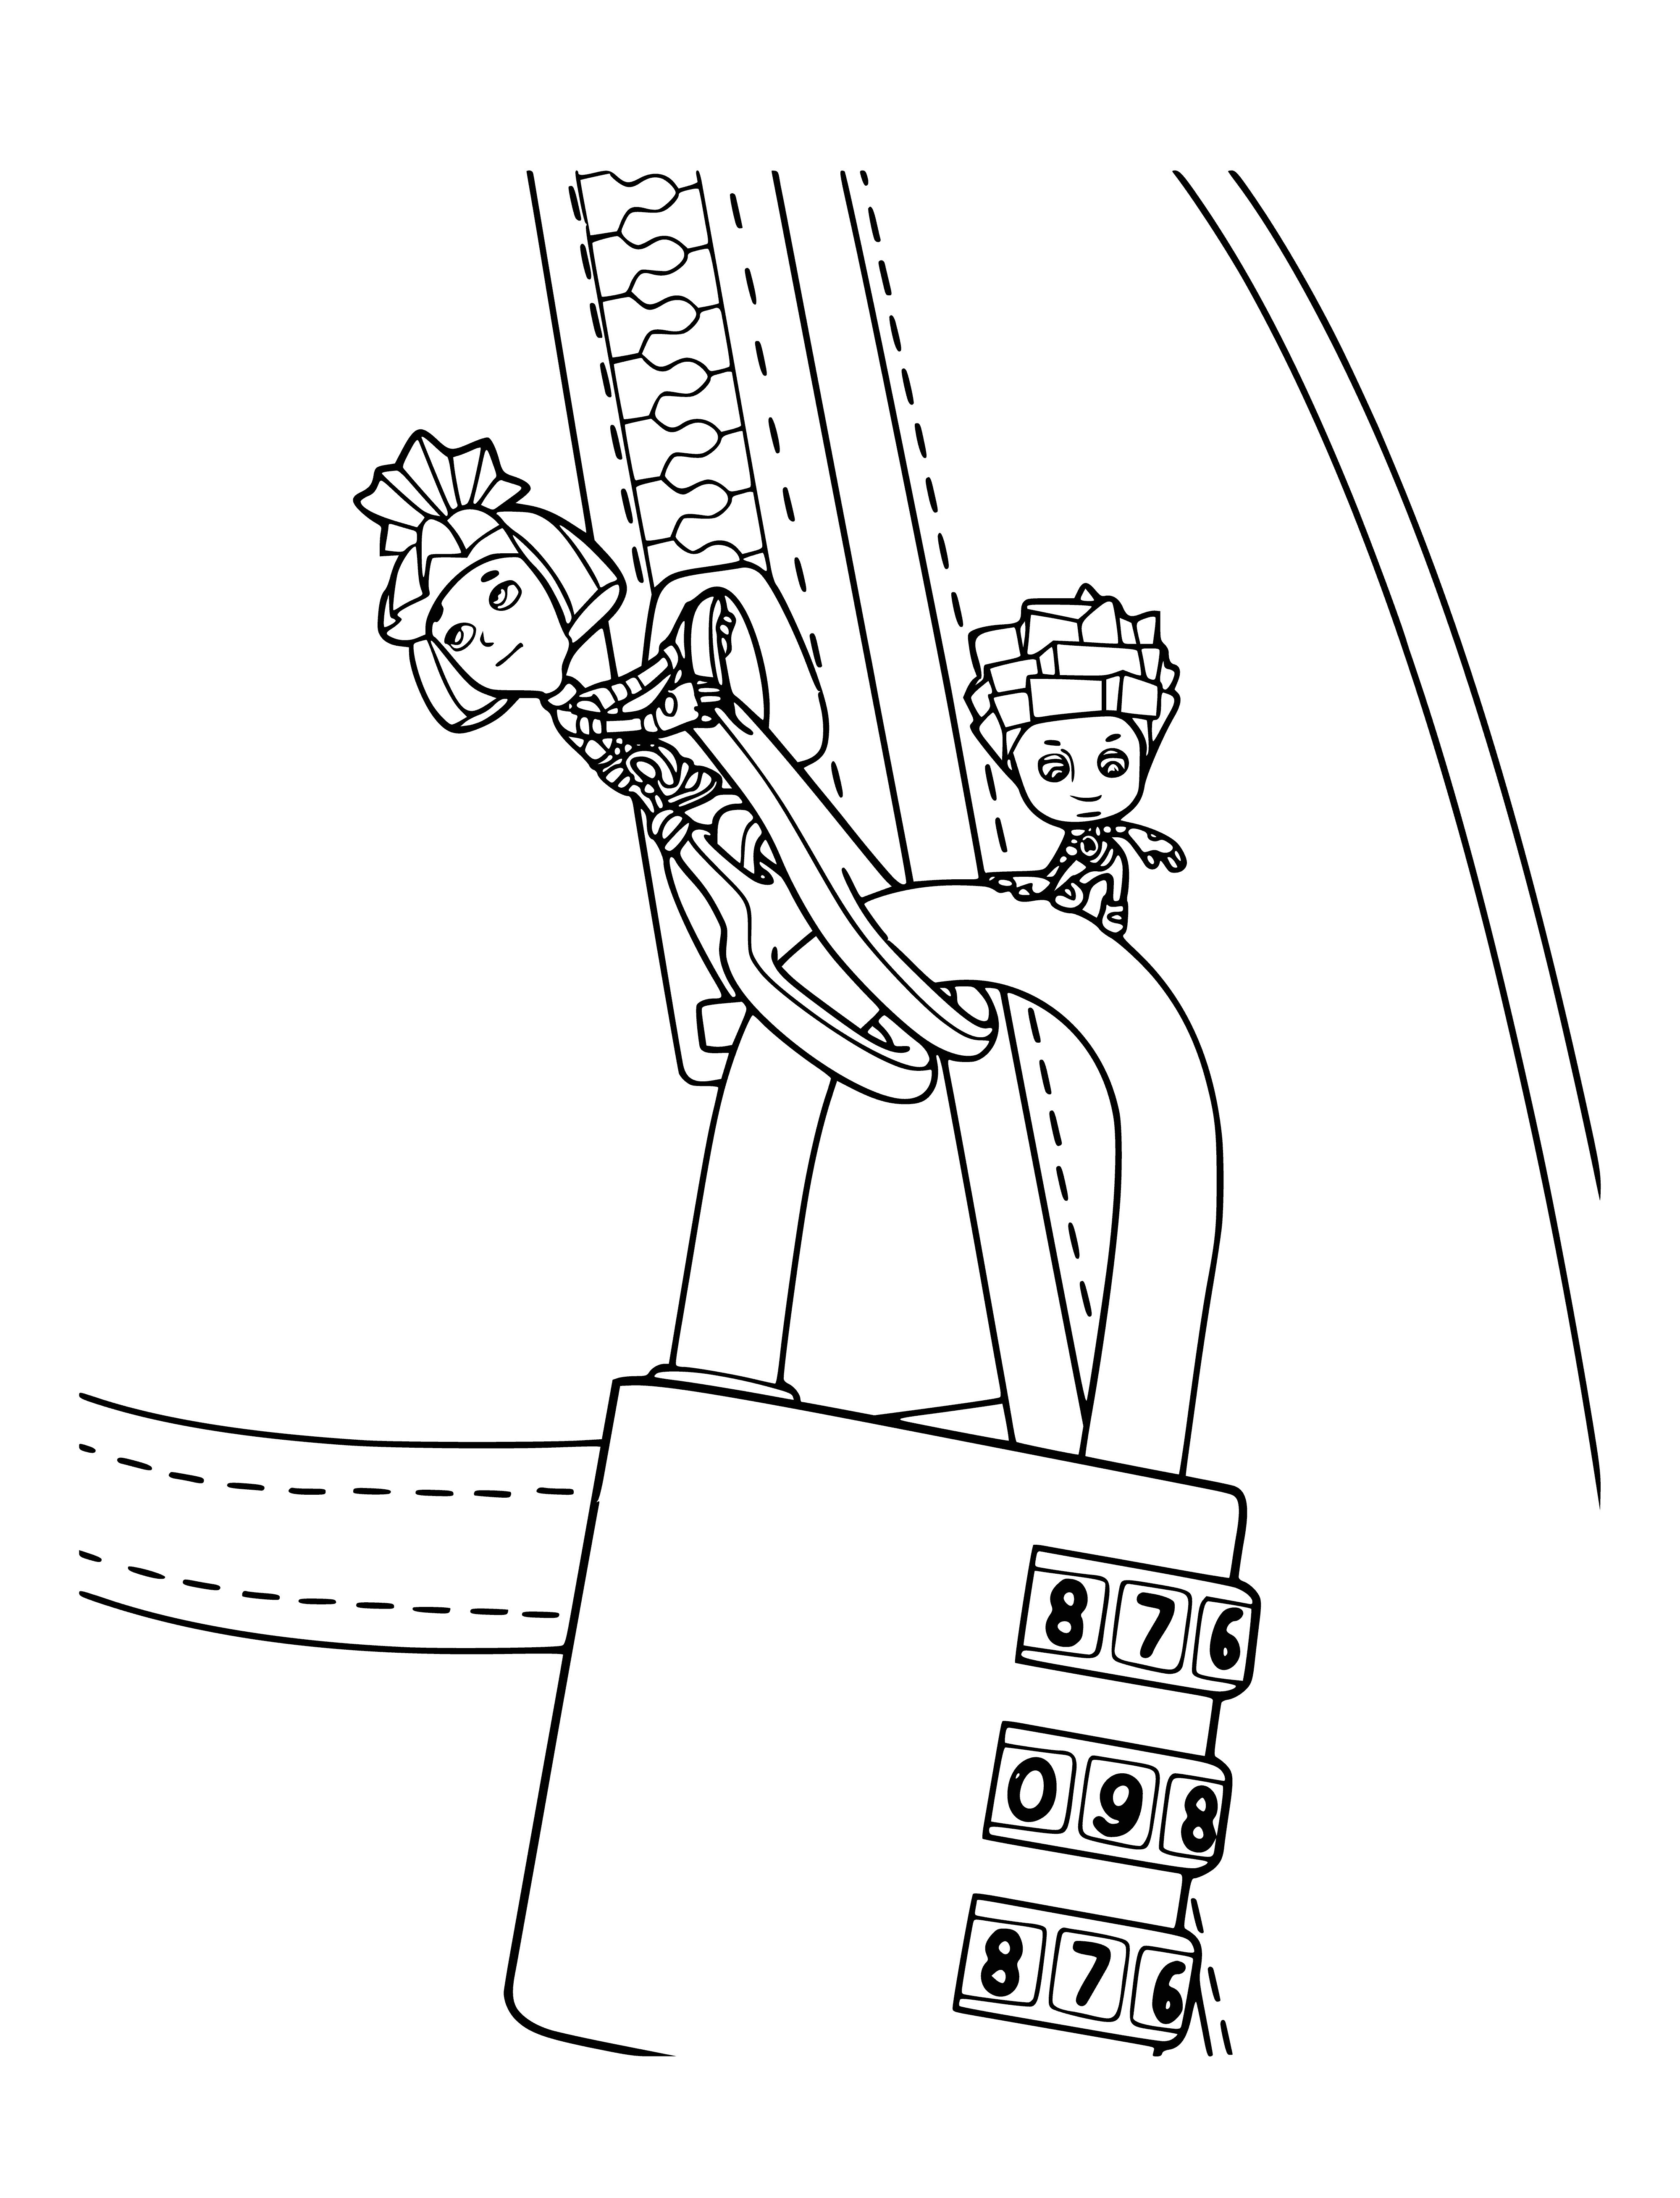 coloring page: Two Fixies are painting a castle in a beautiful green field. They hold a paintbrush and a can of paint, looking up at their task.